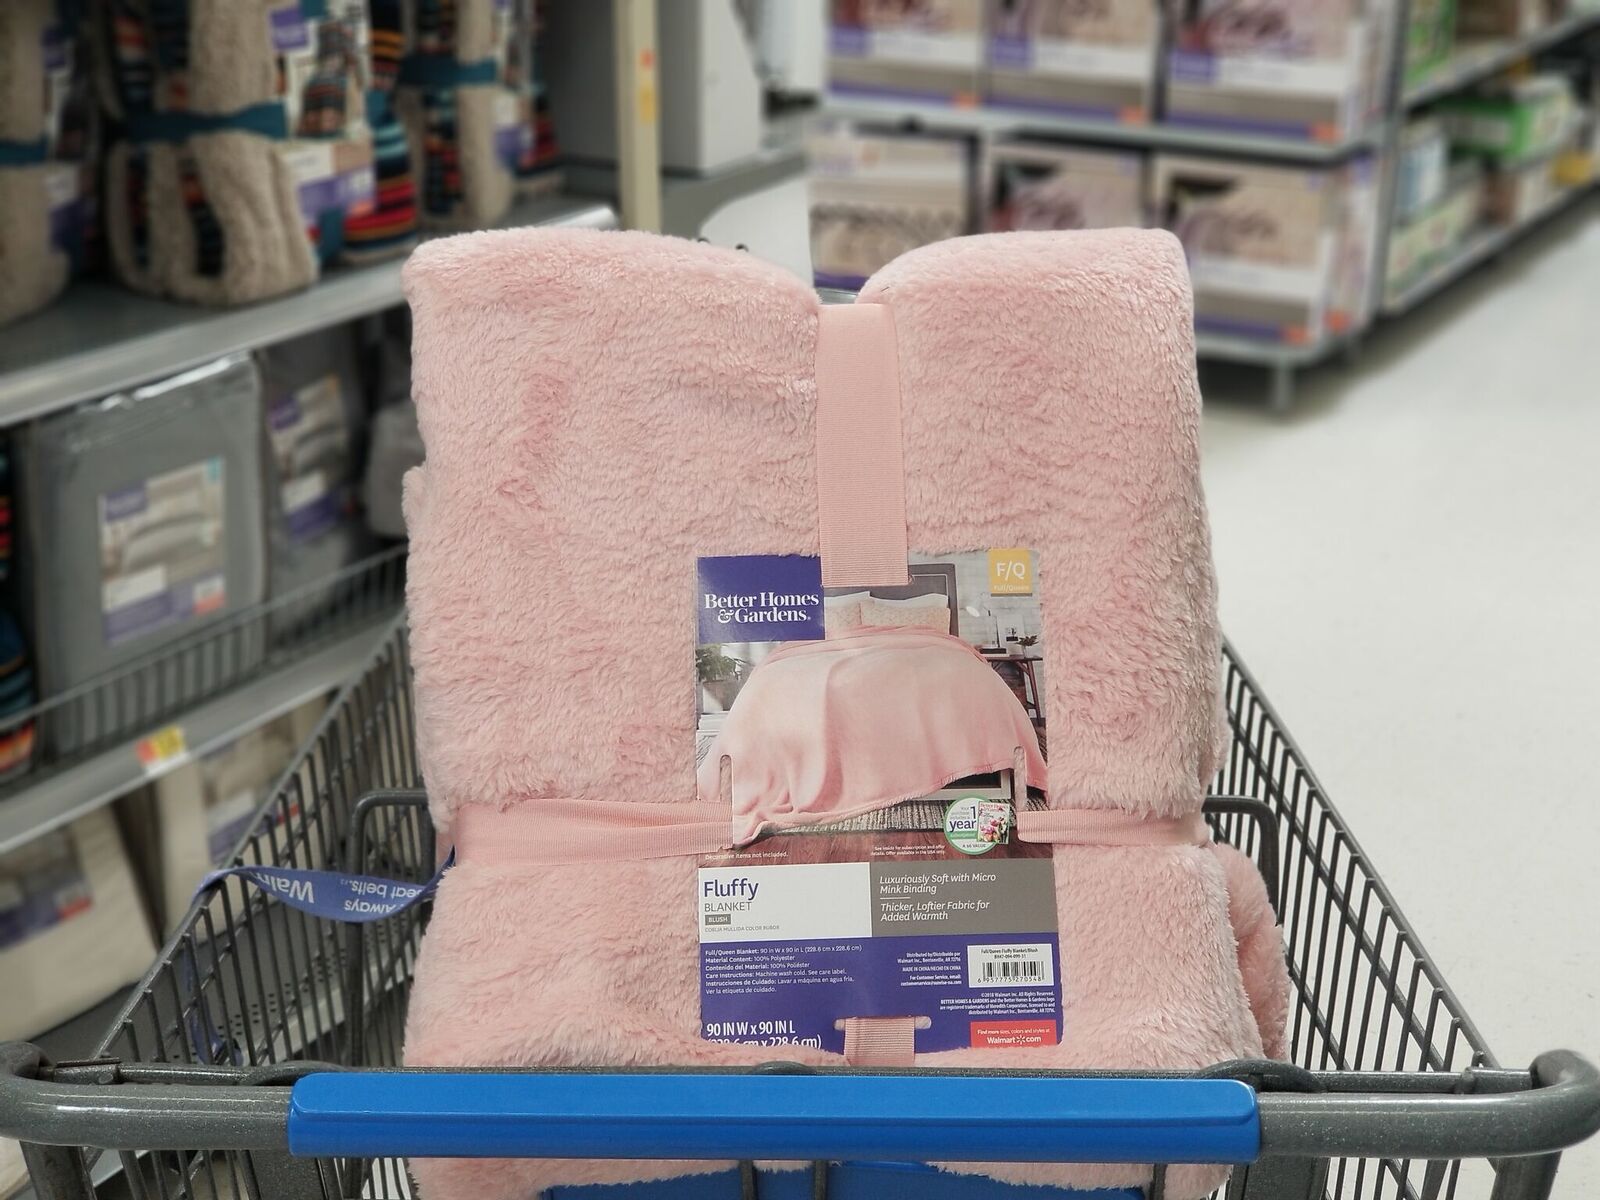 Better Homes And Gardens Fluffy Blanket 24 72 At Walmart The